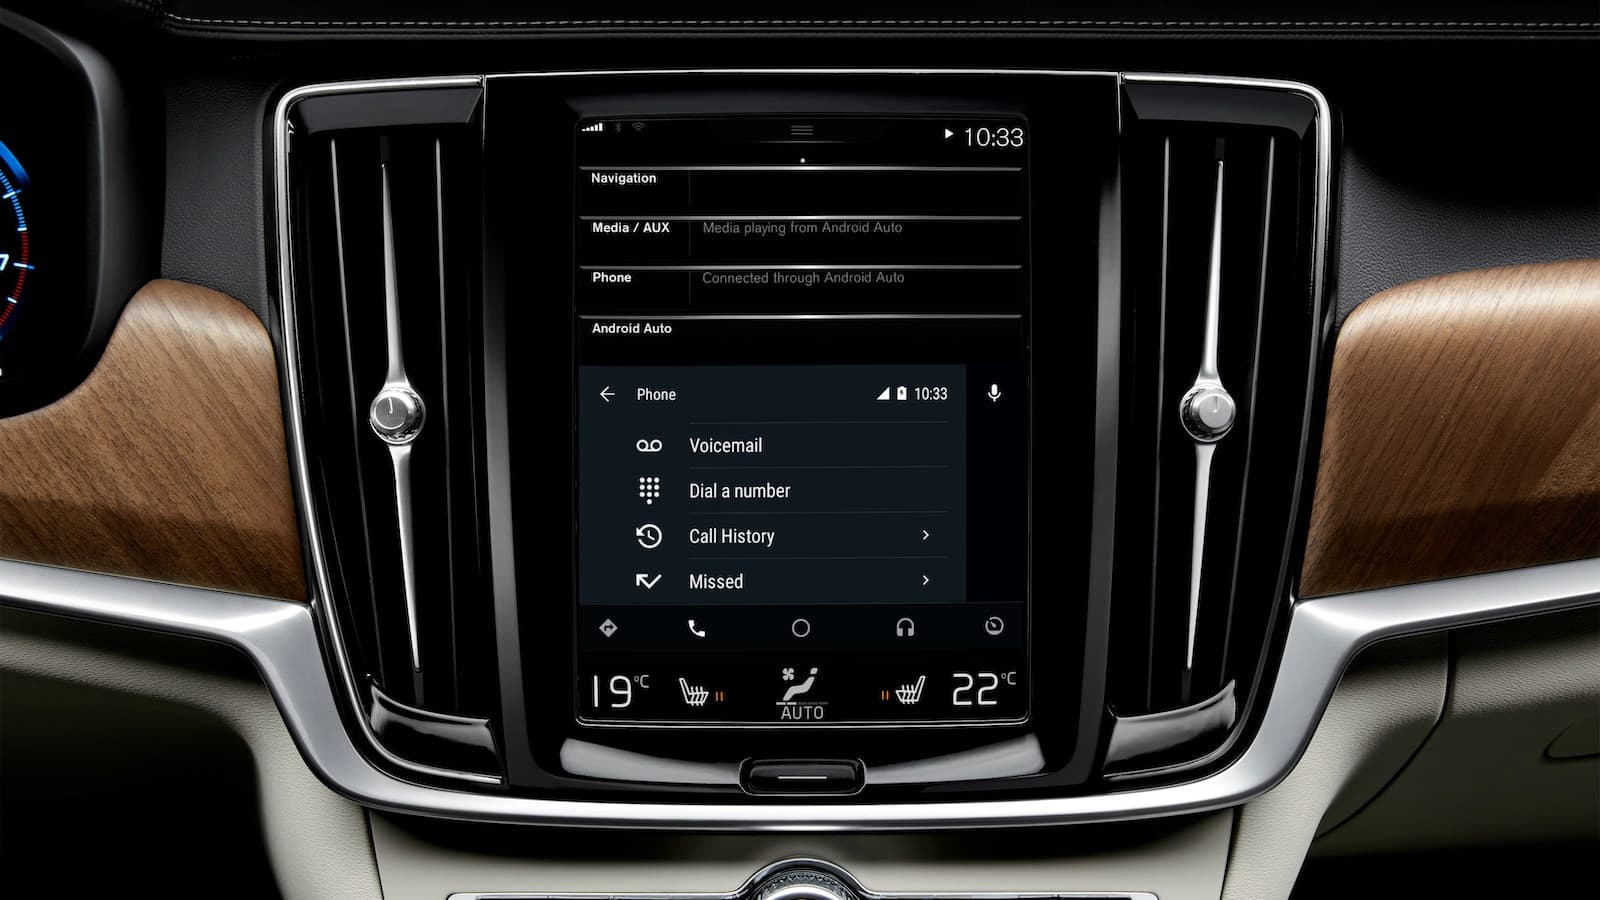 Android Auto contains sensitive personal data